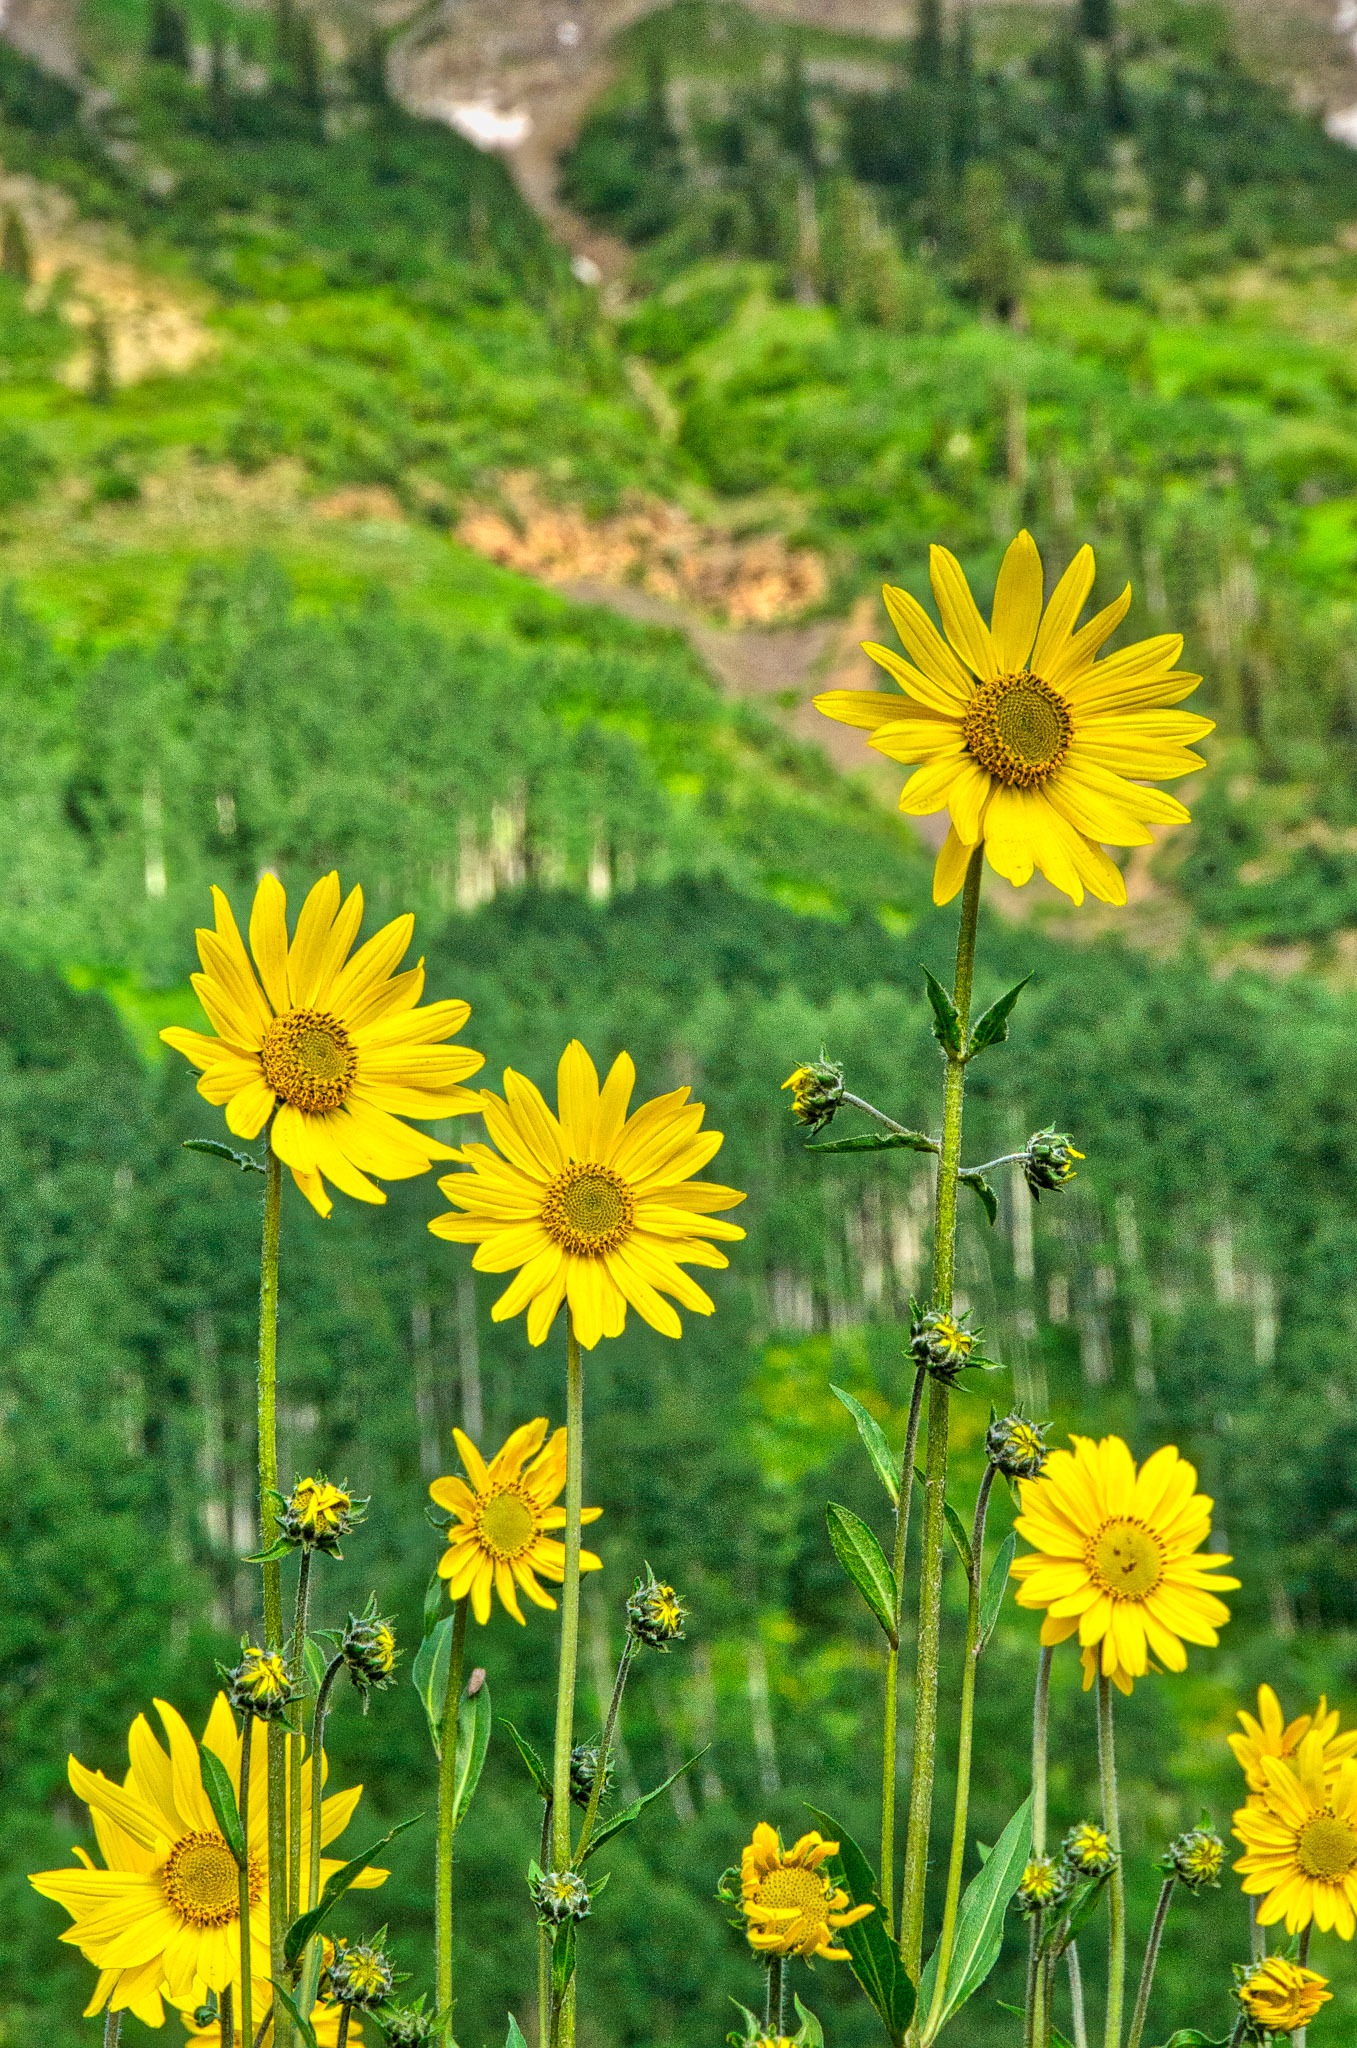 Aspen Sunflowers, Helianthella quinquenervis, grow along Gothic Road, north of Mount Crested Butte, Colorado